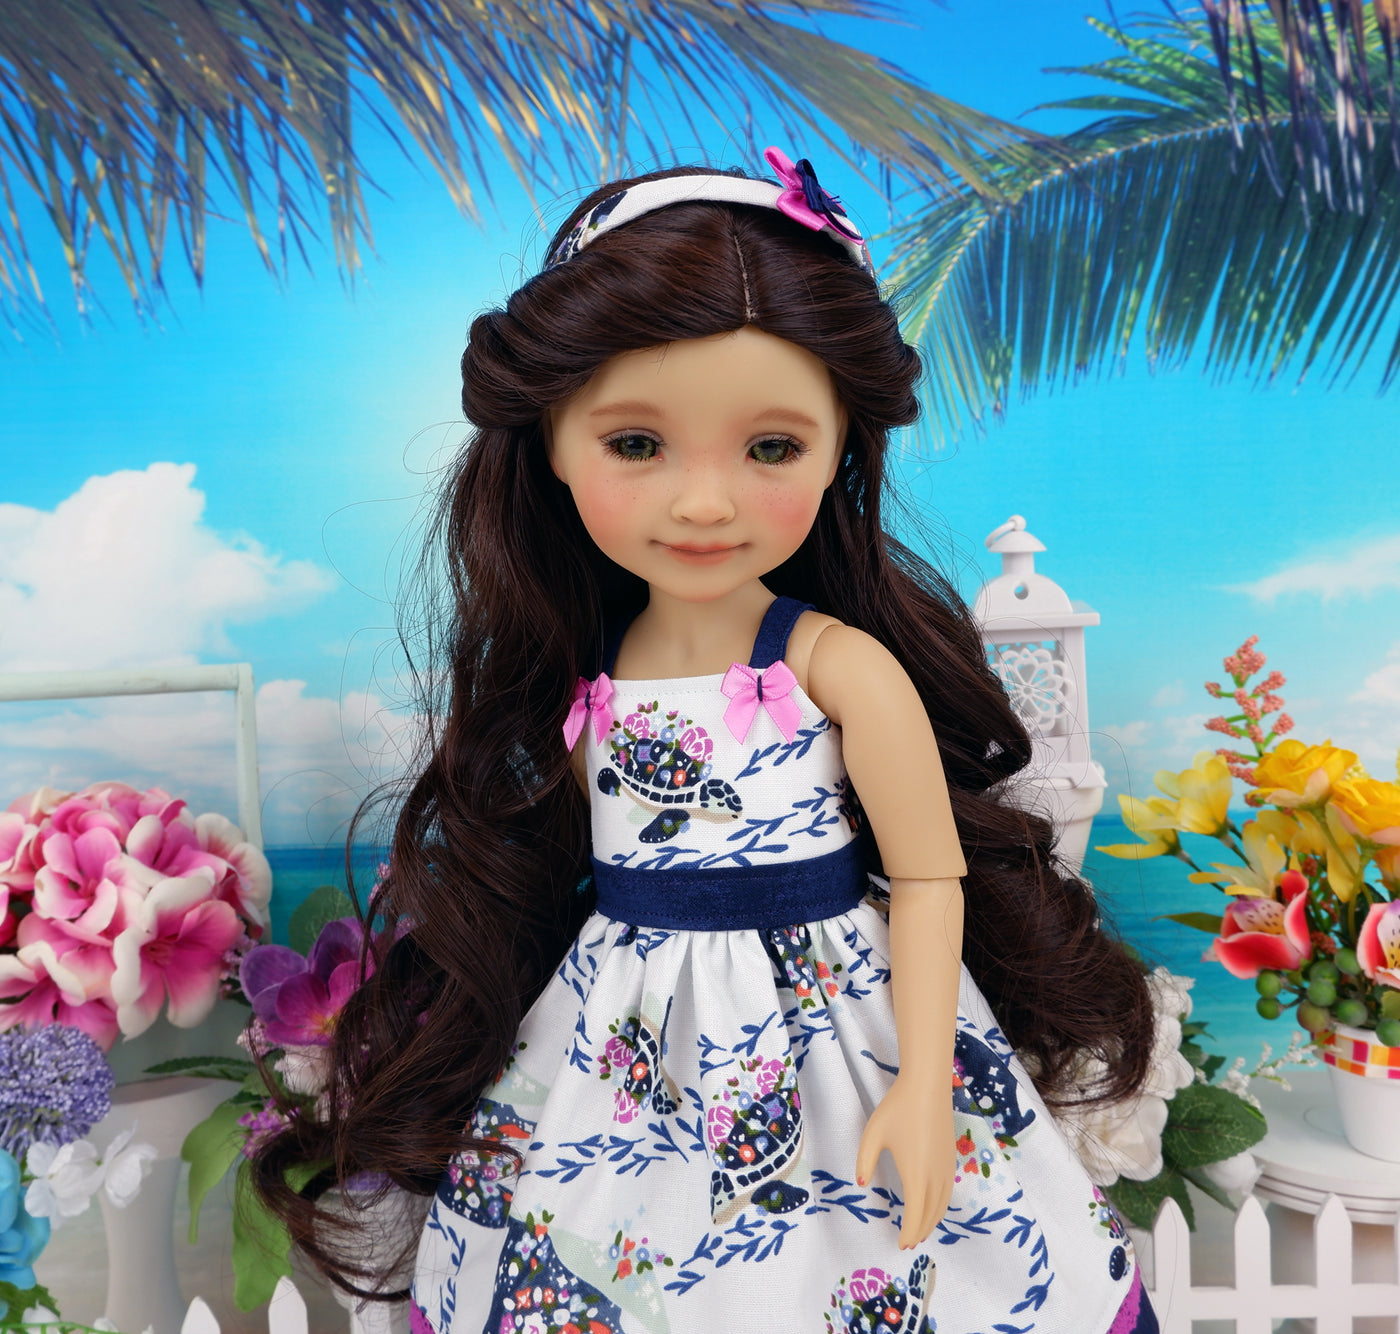 Floral Sealife - dress with shoes for Ruby Red Fashion Friends doll